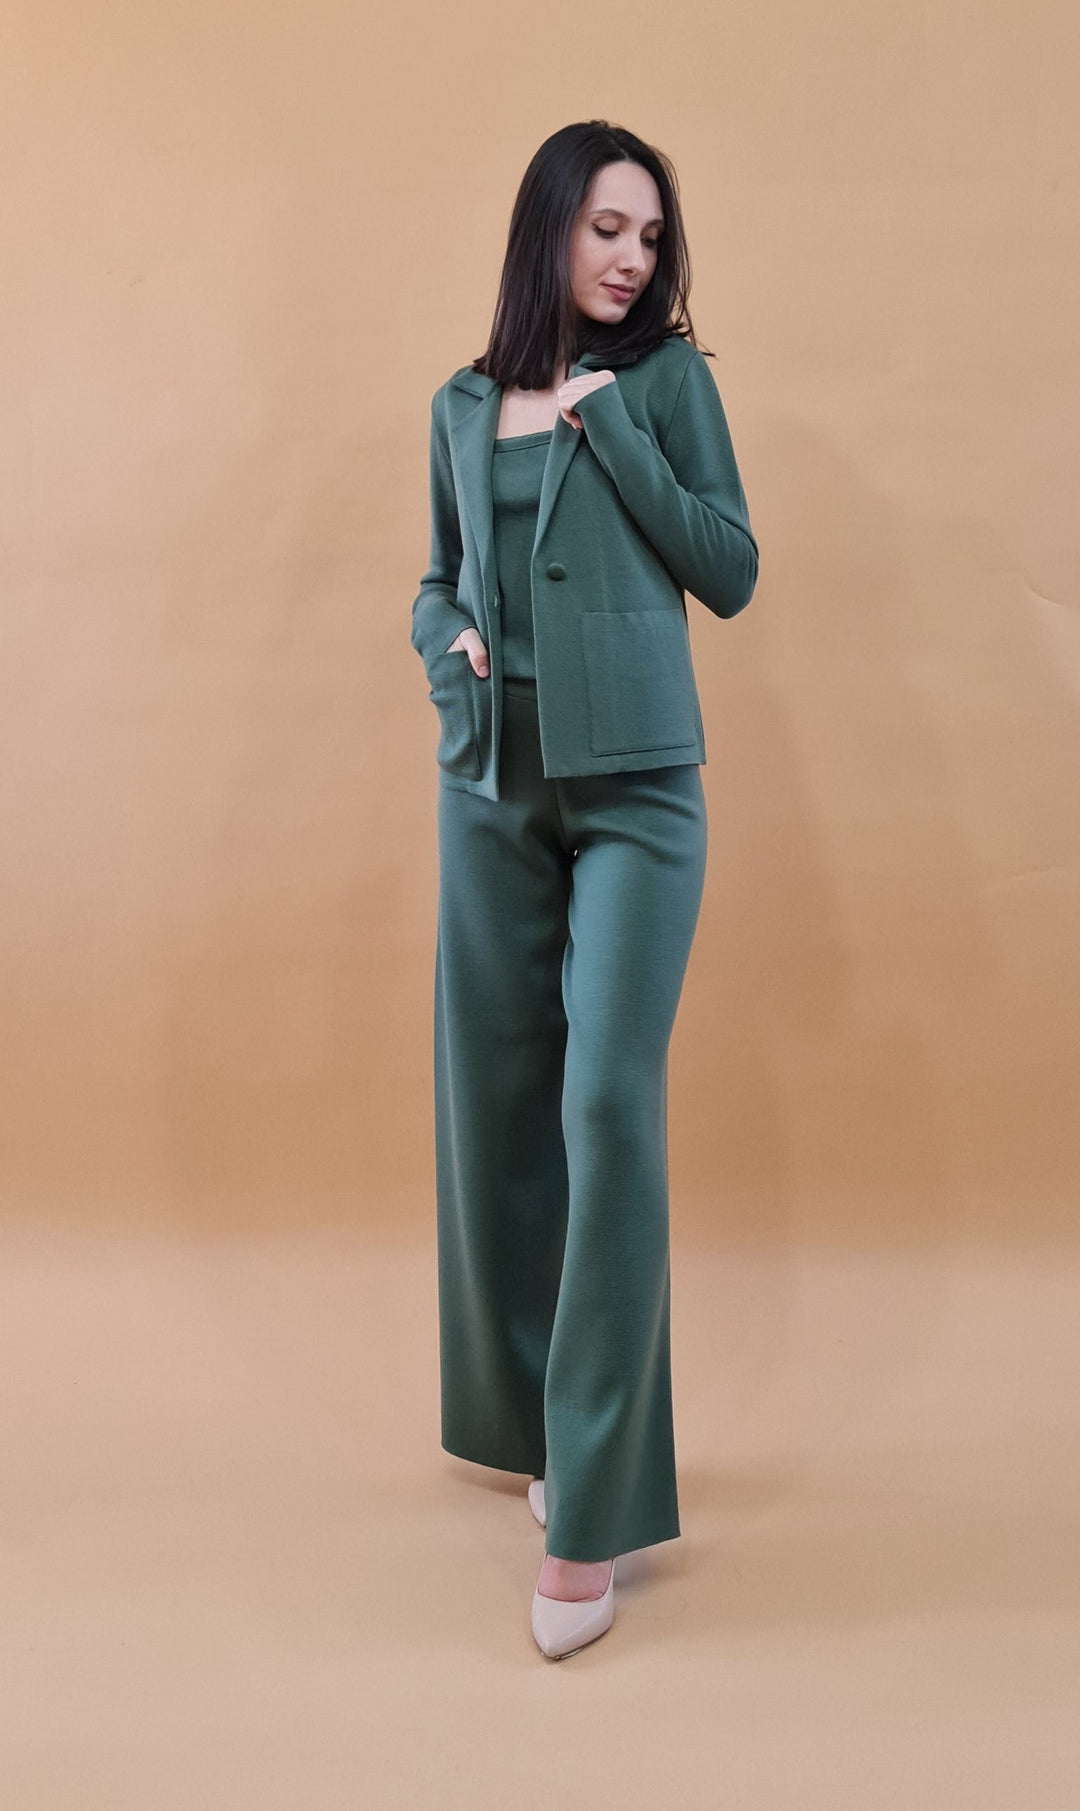 Woman wearing green suit with matching blazer and wide-leg pants on beige background